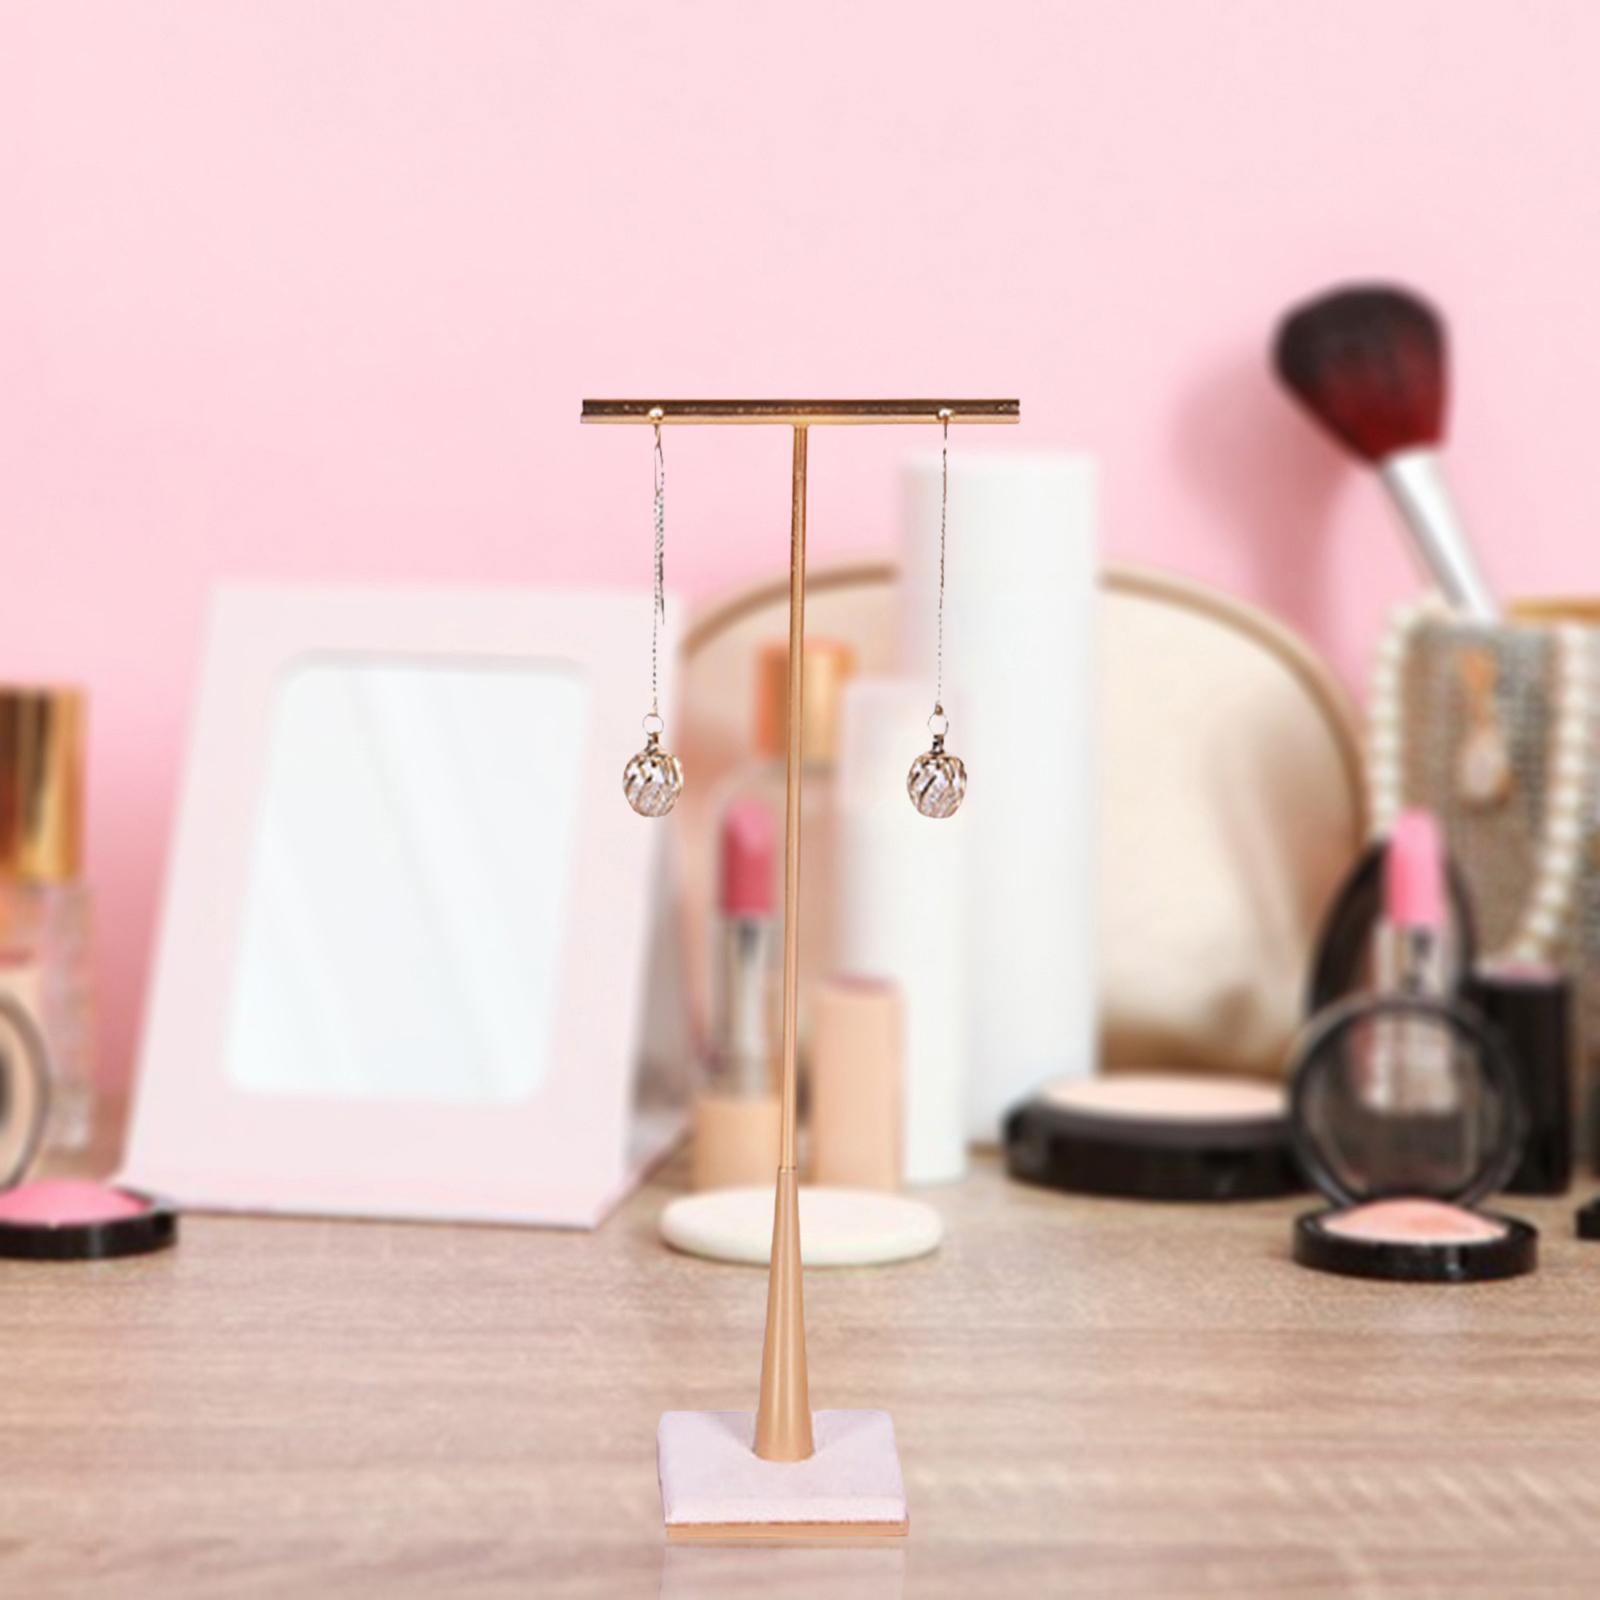 Hanging Earring Organizer Jewelry Towers L